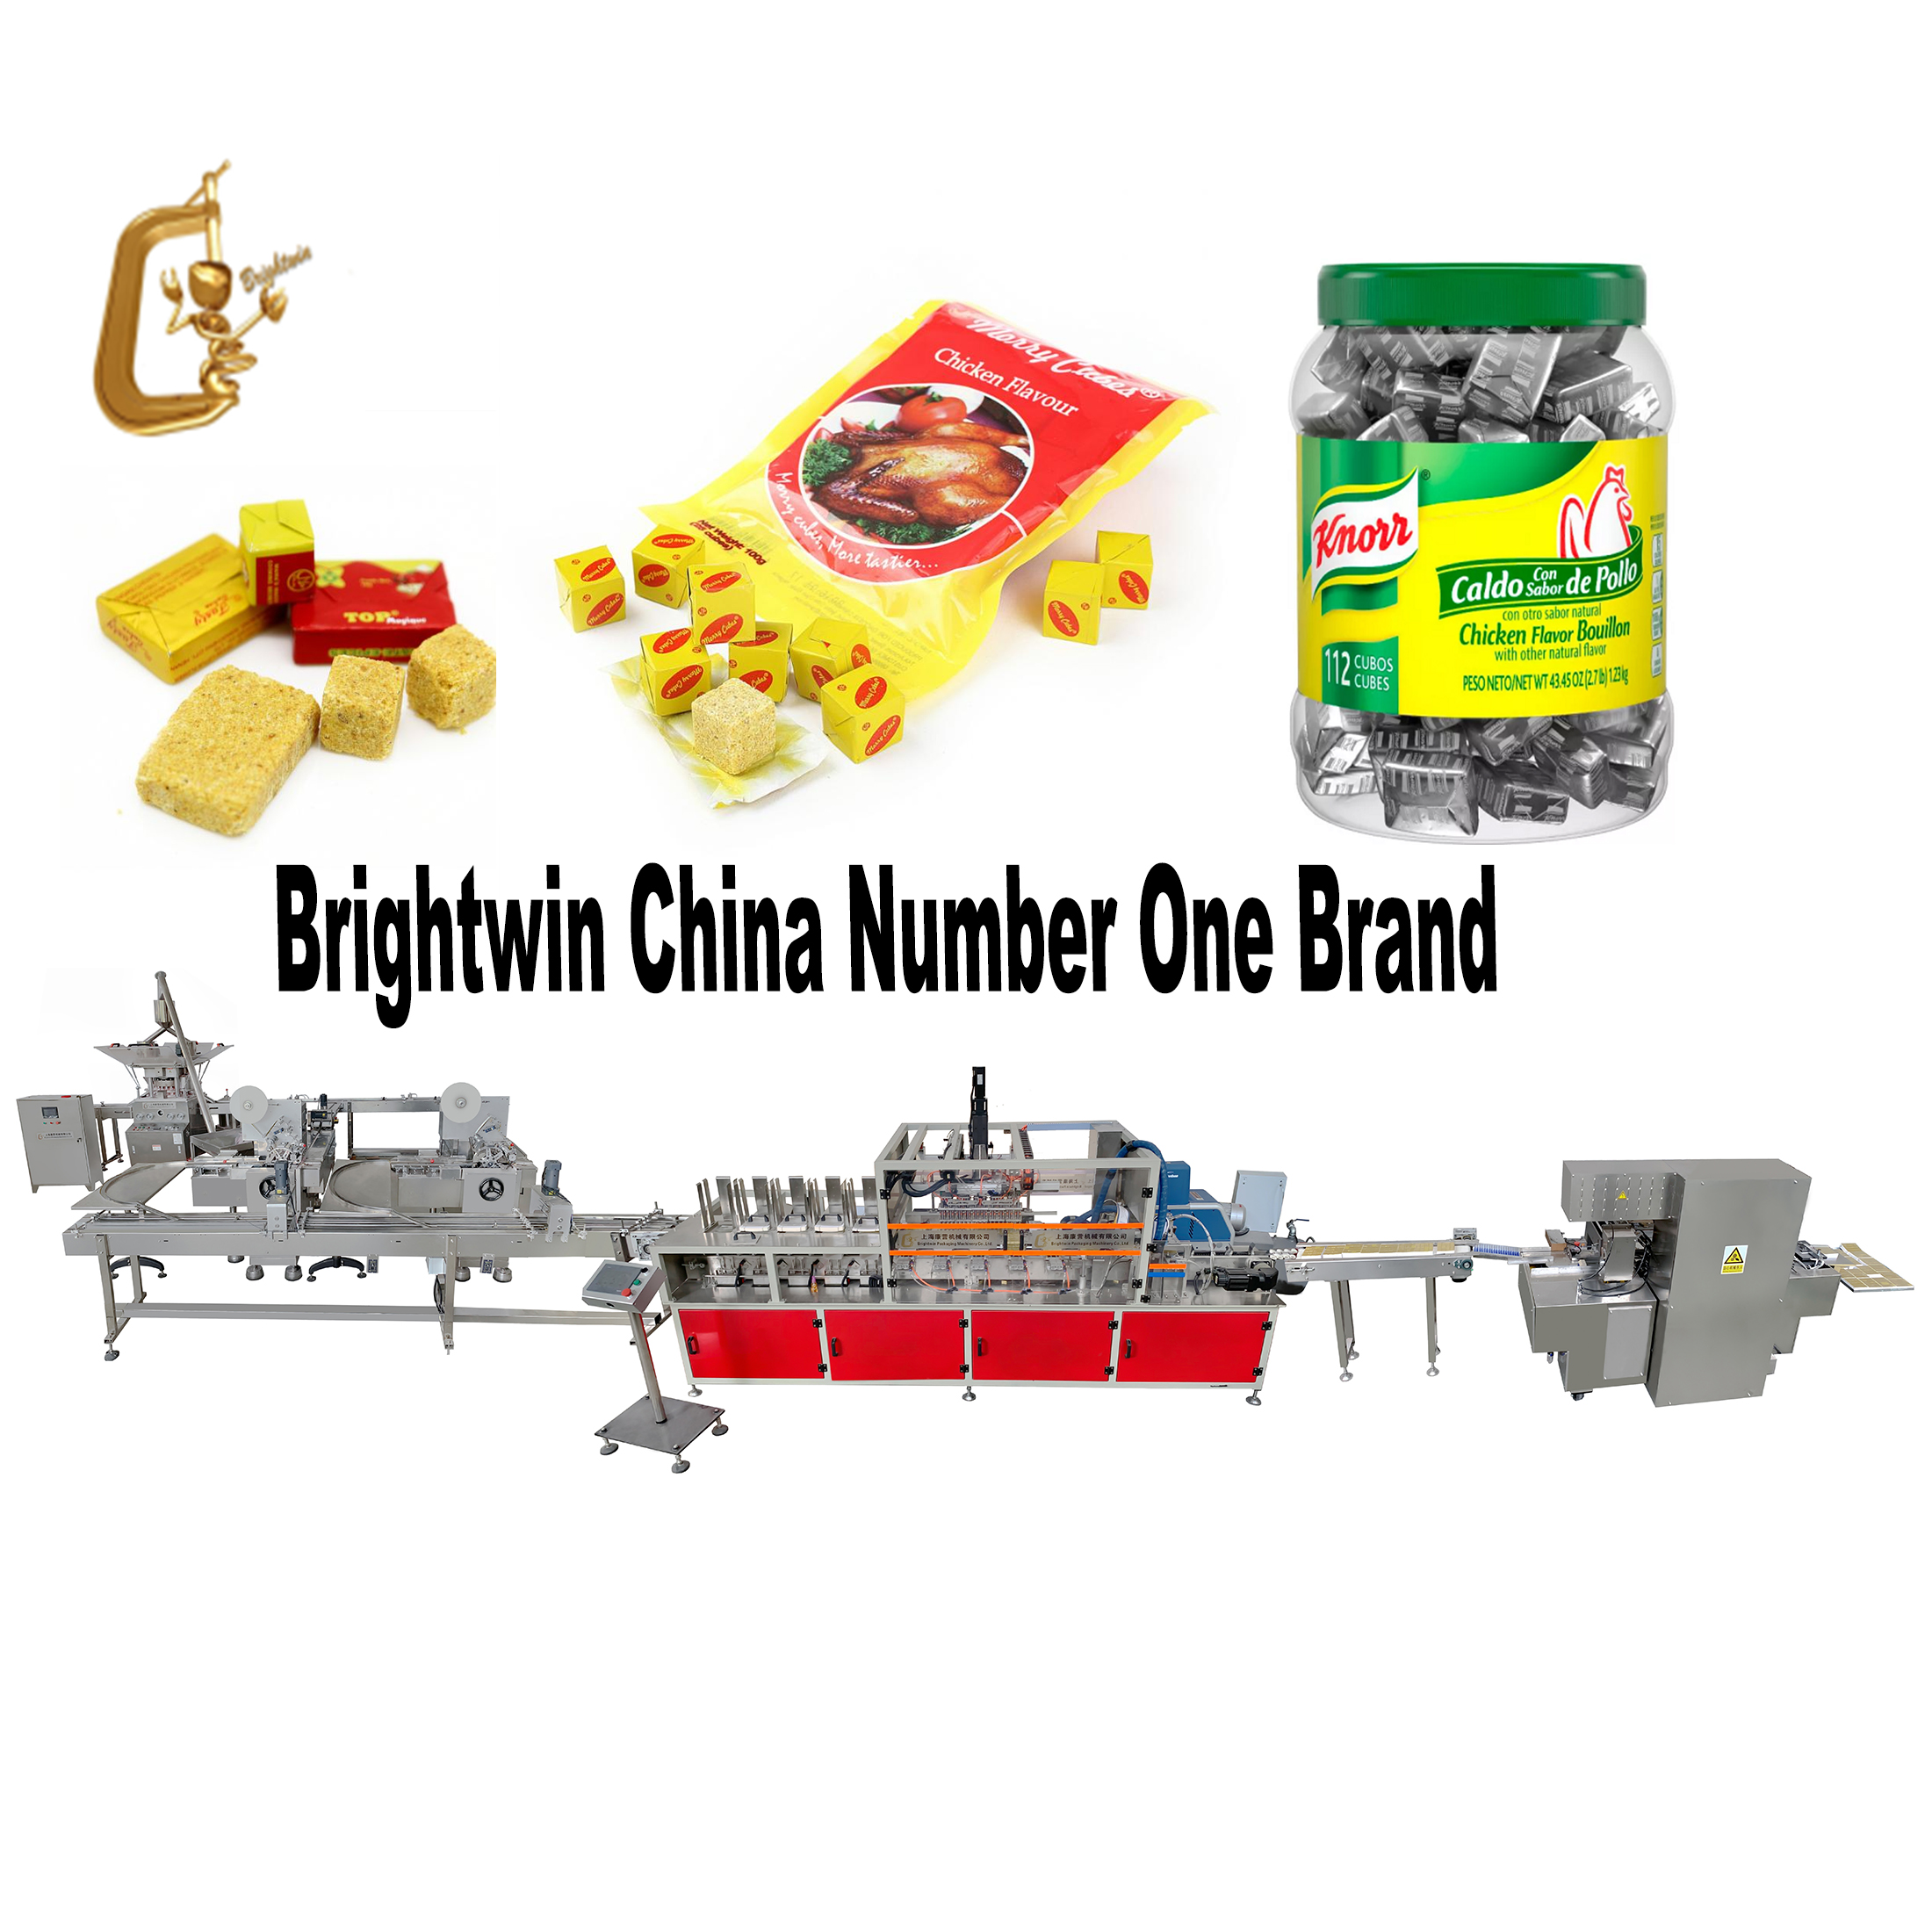 Brightwin Shanghai Beef Flavor Bouillon Seasoning Cube Soup Cubes 4g 10g 12g Pressing Wrapping Boxing Packing Processing Equipment Machine Featured Image